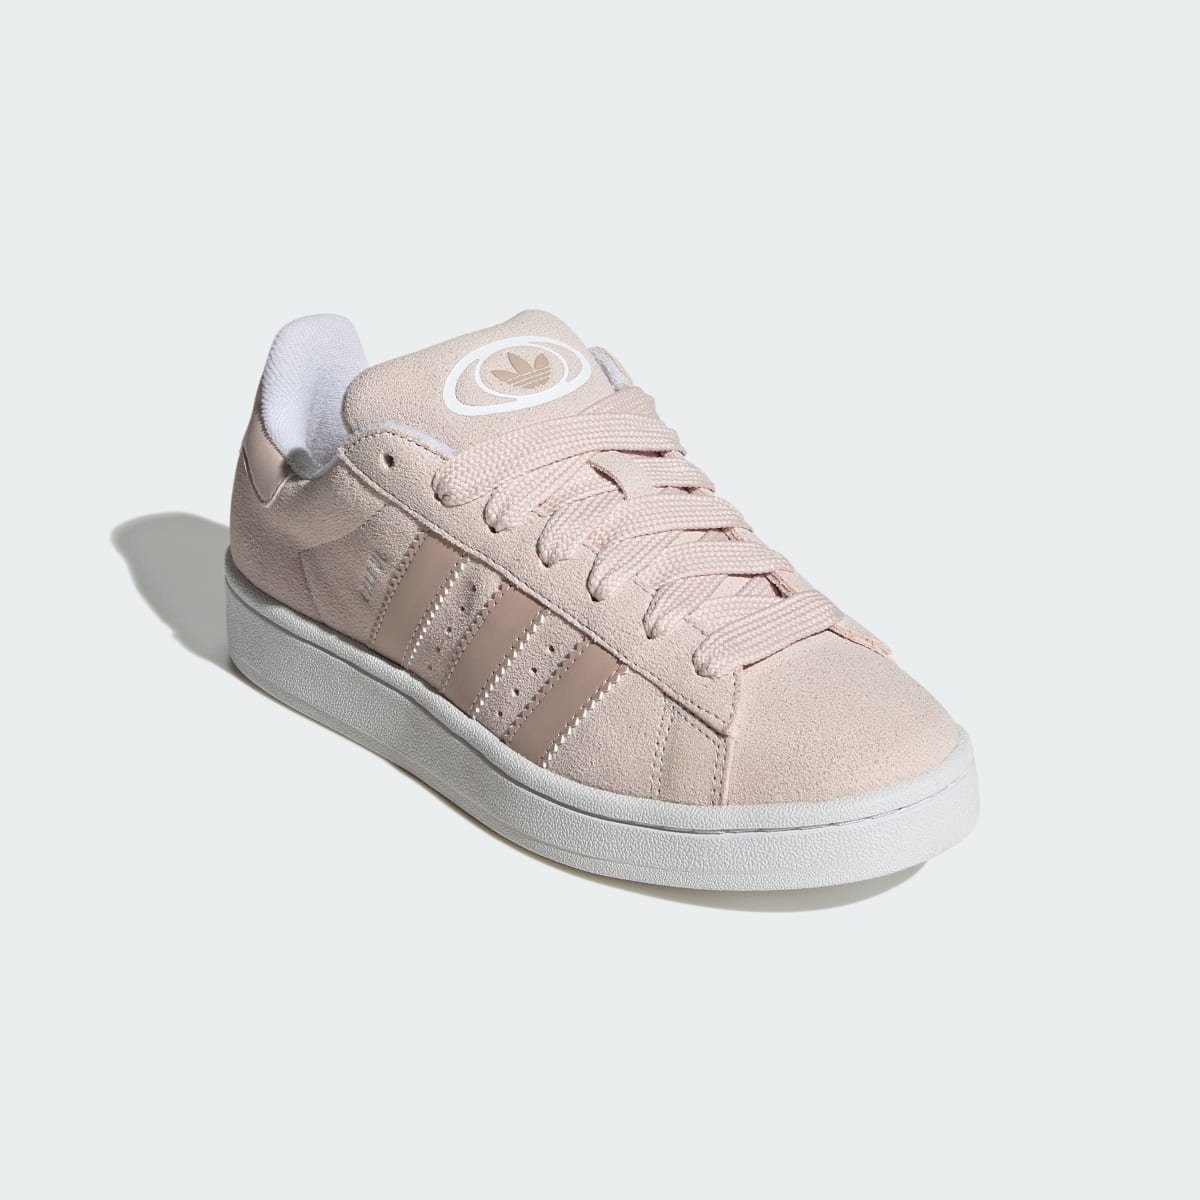 Adidas Campus 00s Shoes. 5